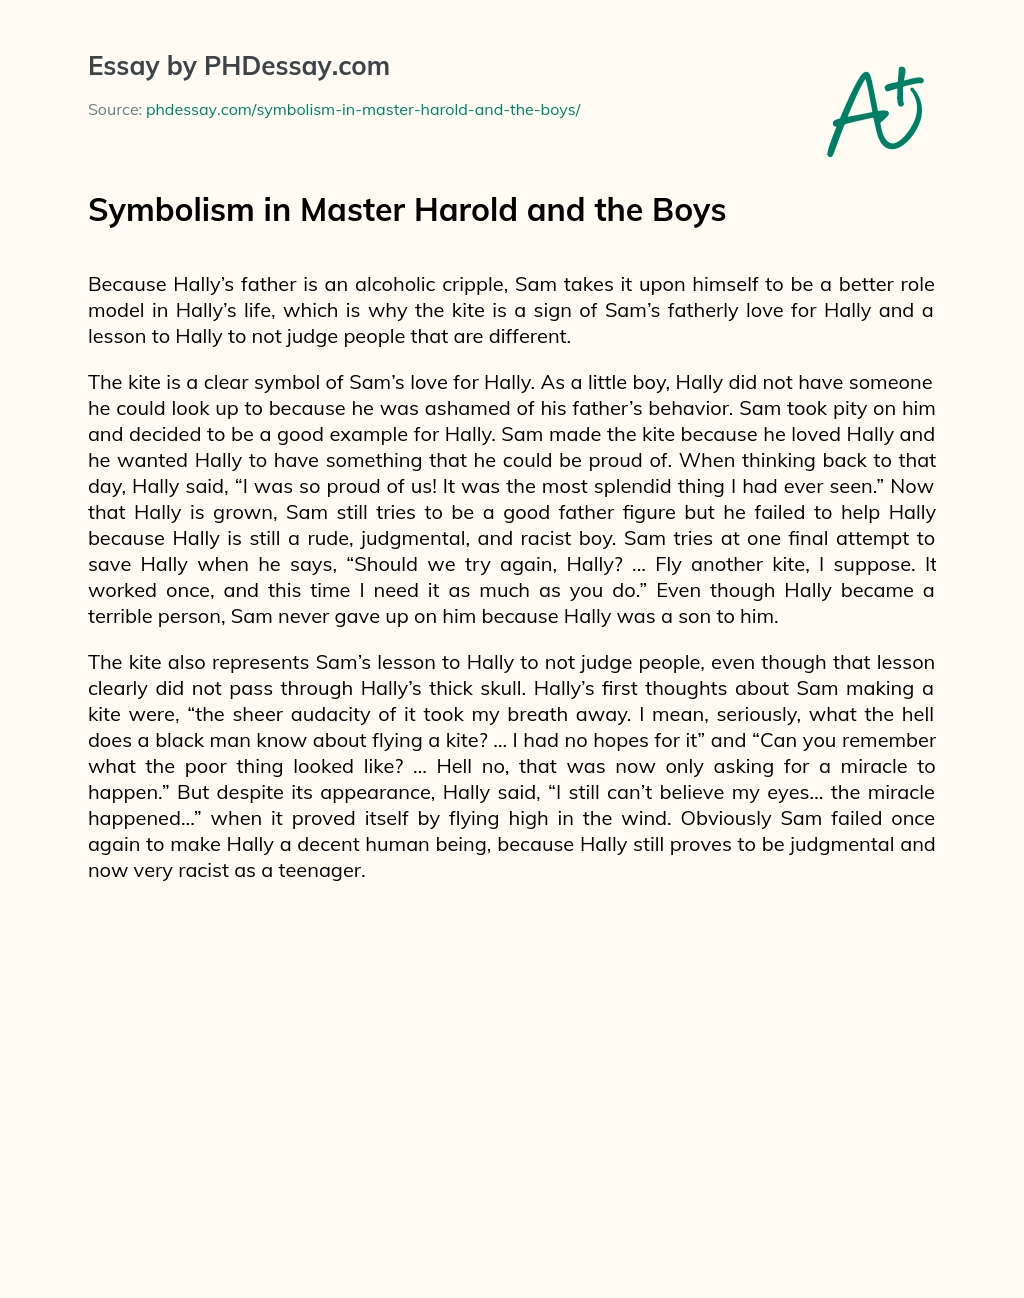 Symbolism in Master Harold and the Boys essay